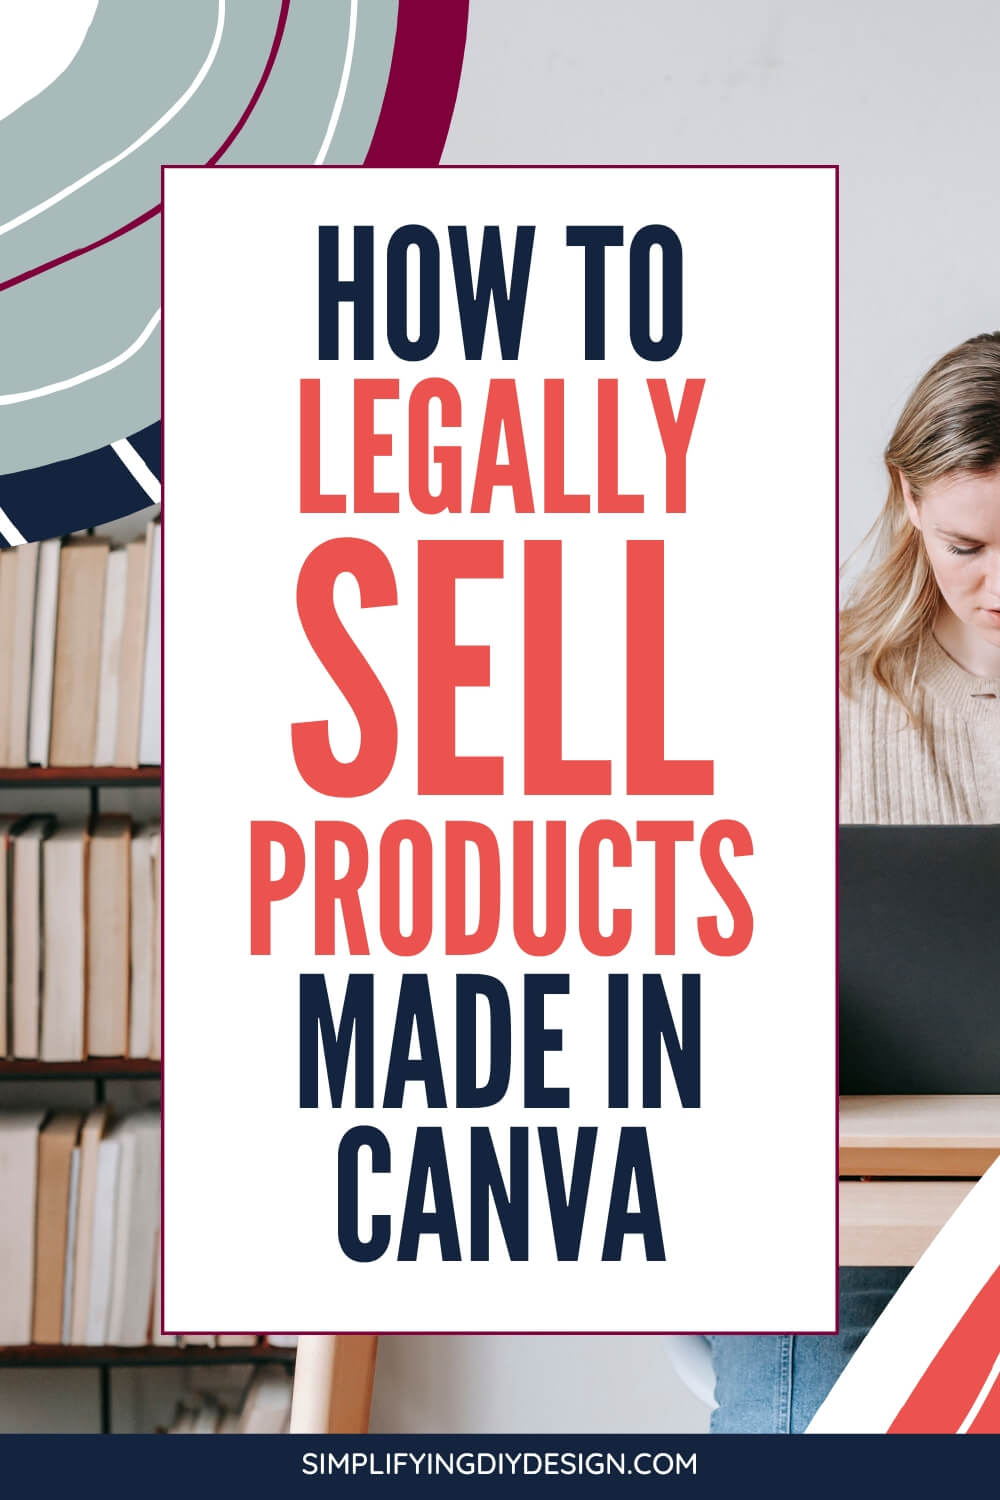 Sell products made in Canva? You could be violating Canva's Content License Agreement! Here's what you need to know to legally sell products made in Canva!